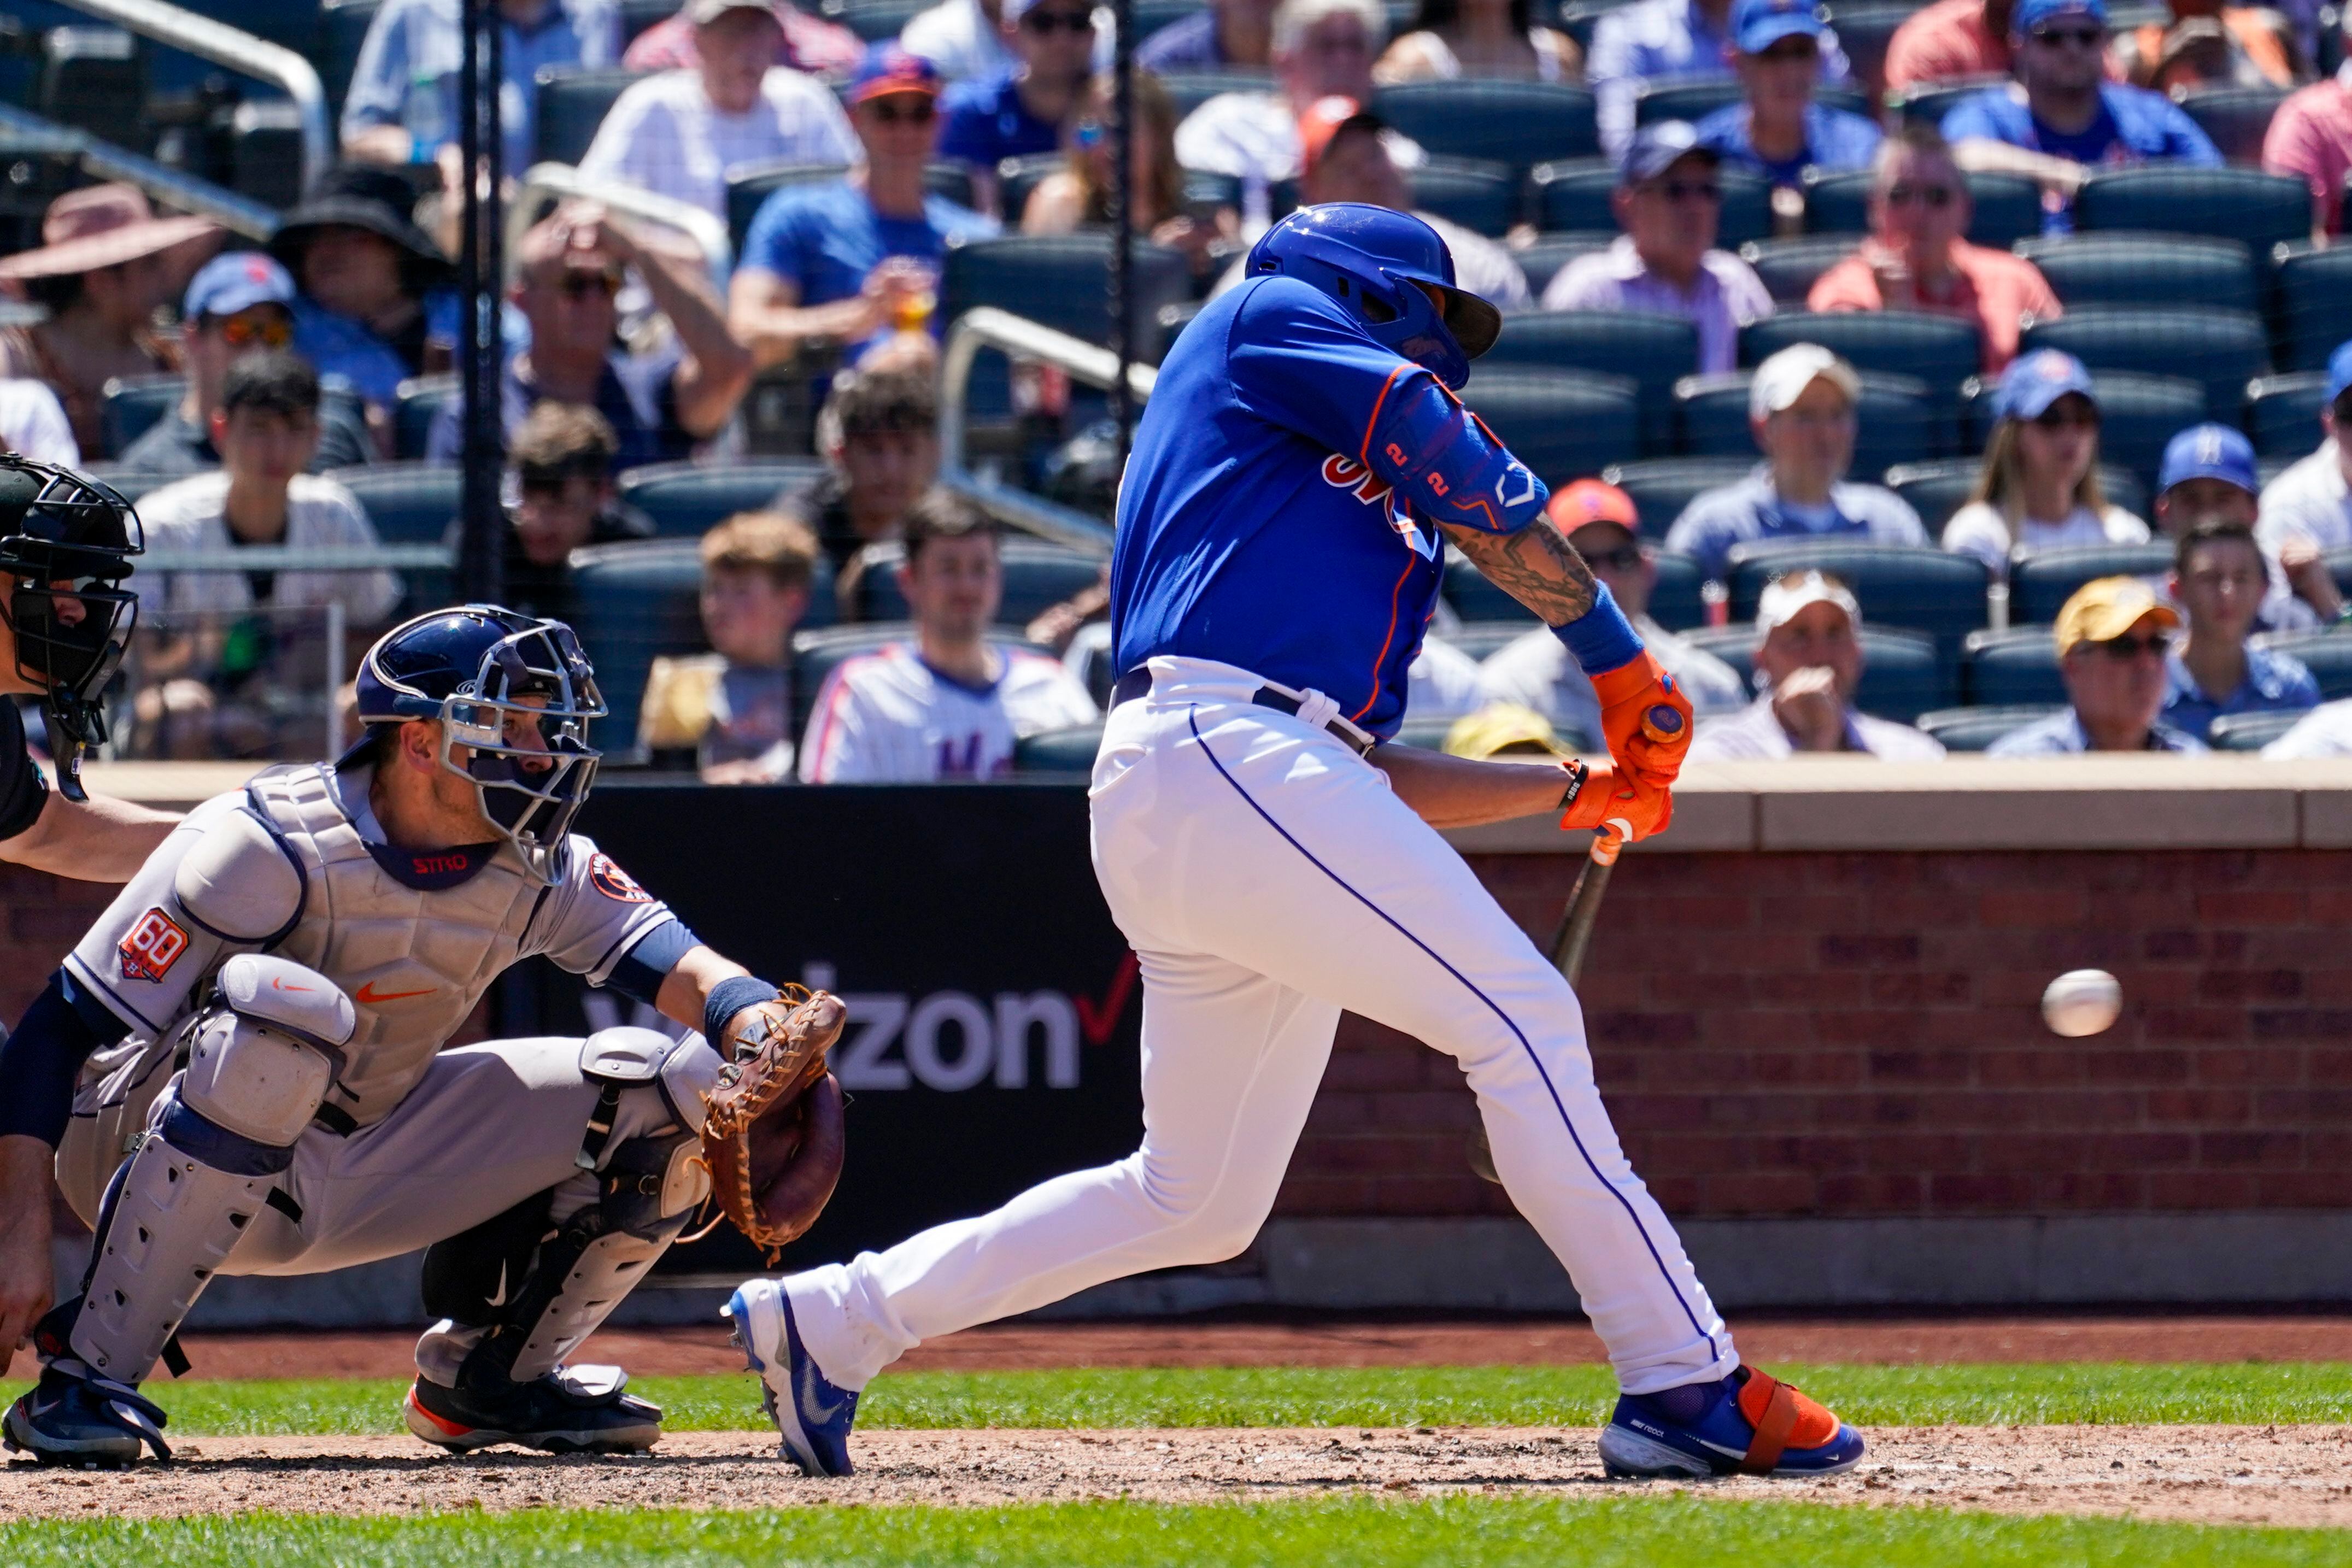 Luis Guillorme's walk-off hit ends Mets' skid in win over Dodgers